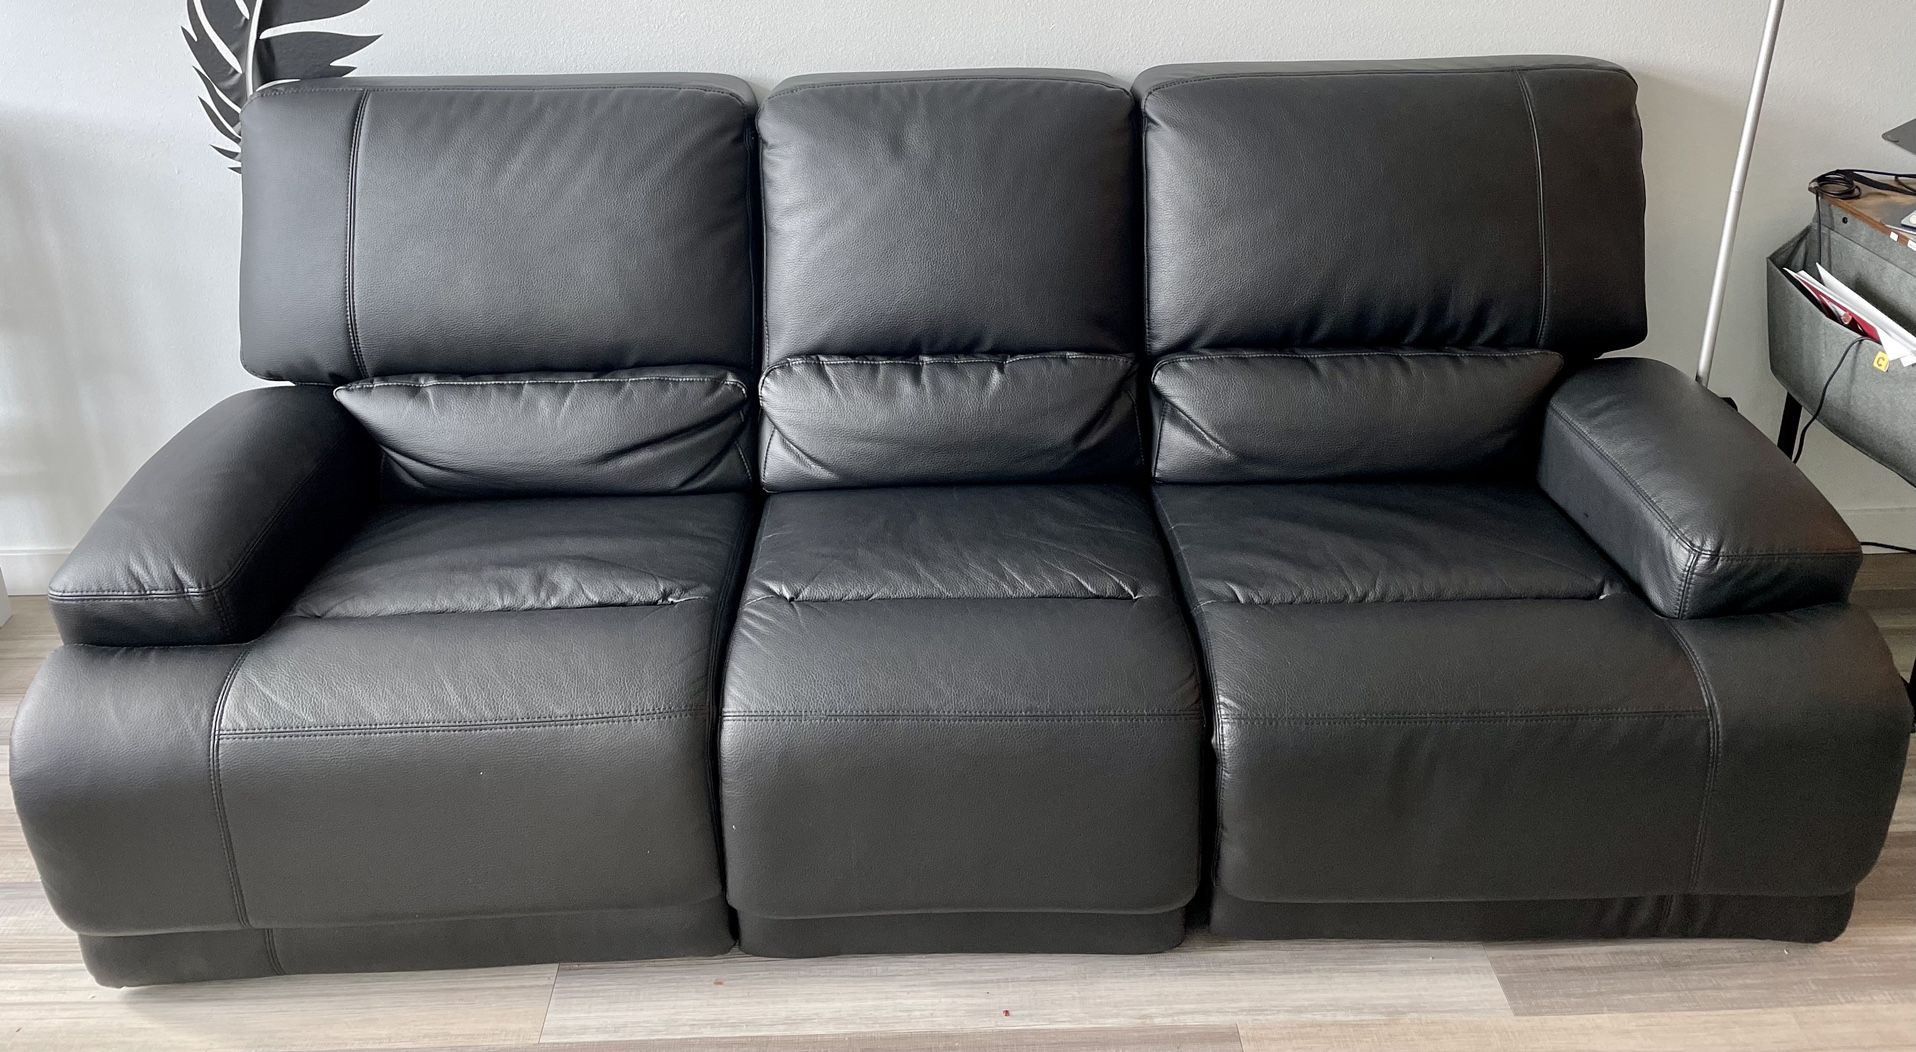 3 Seater Recliner Sofa - Black From IKEA